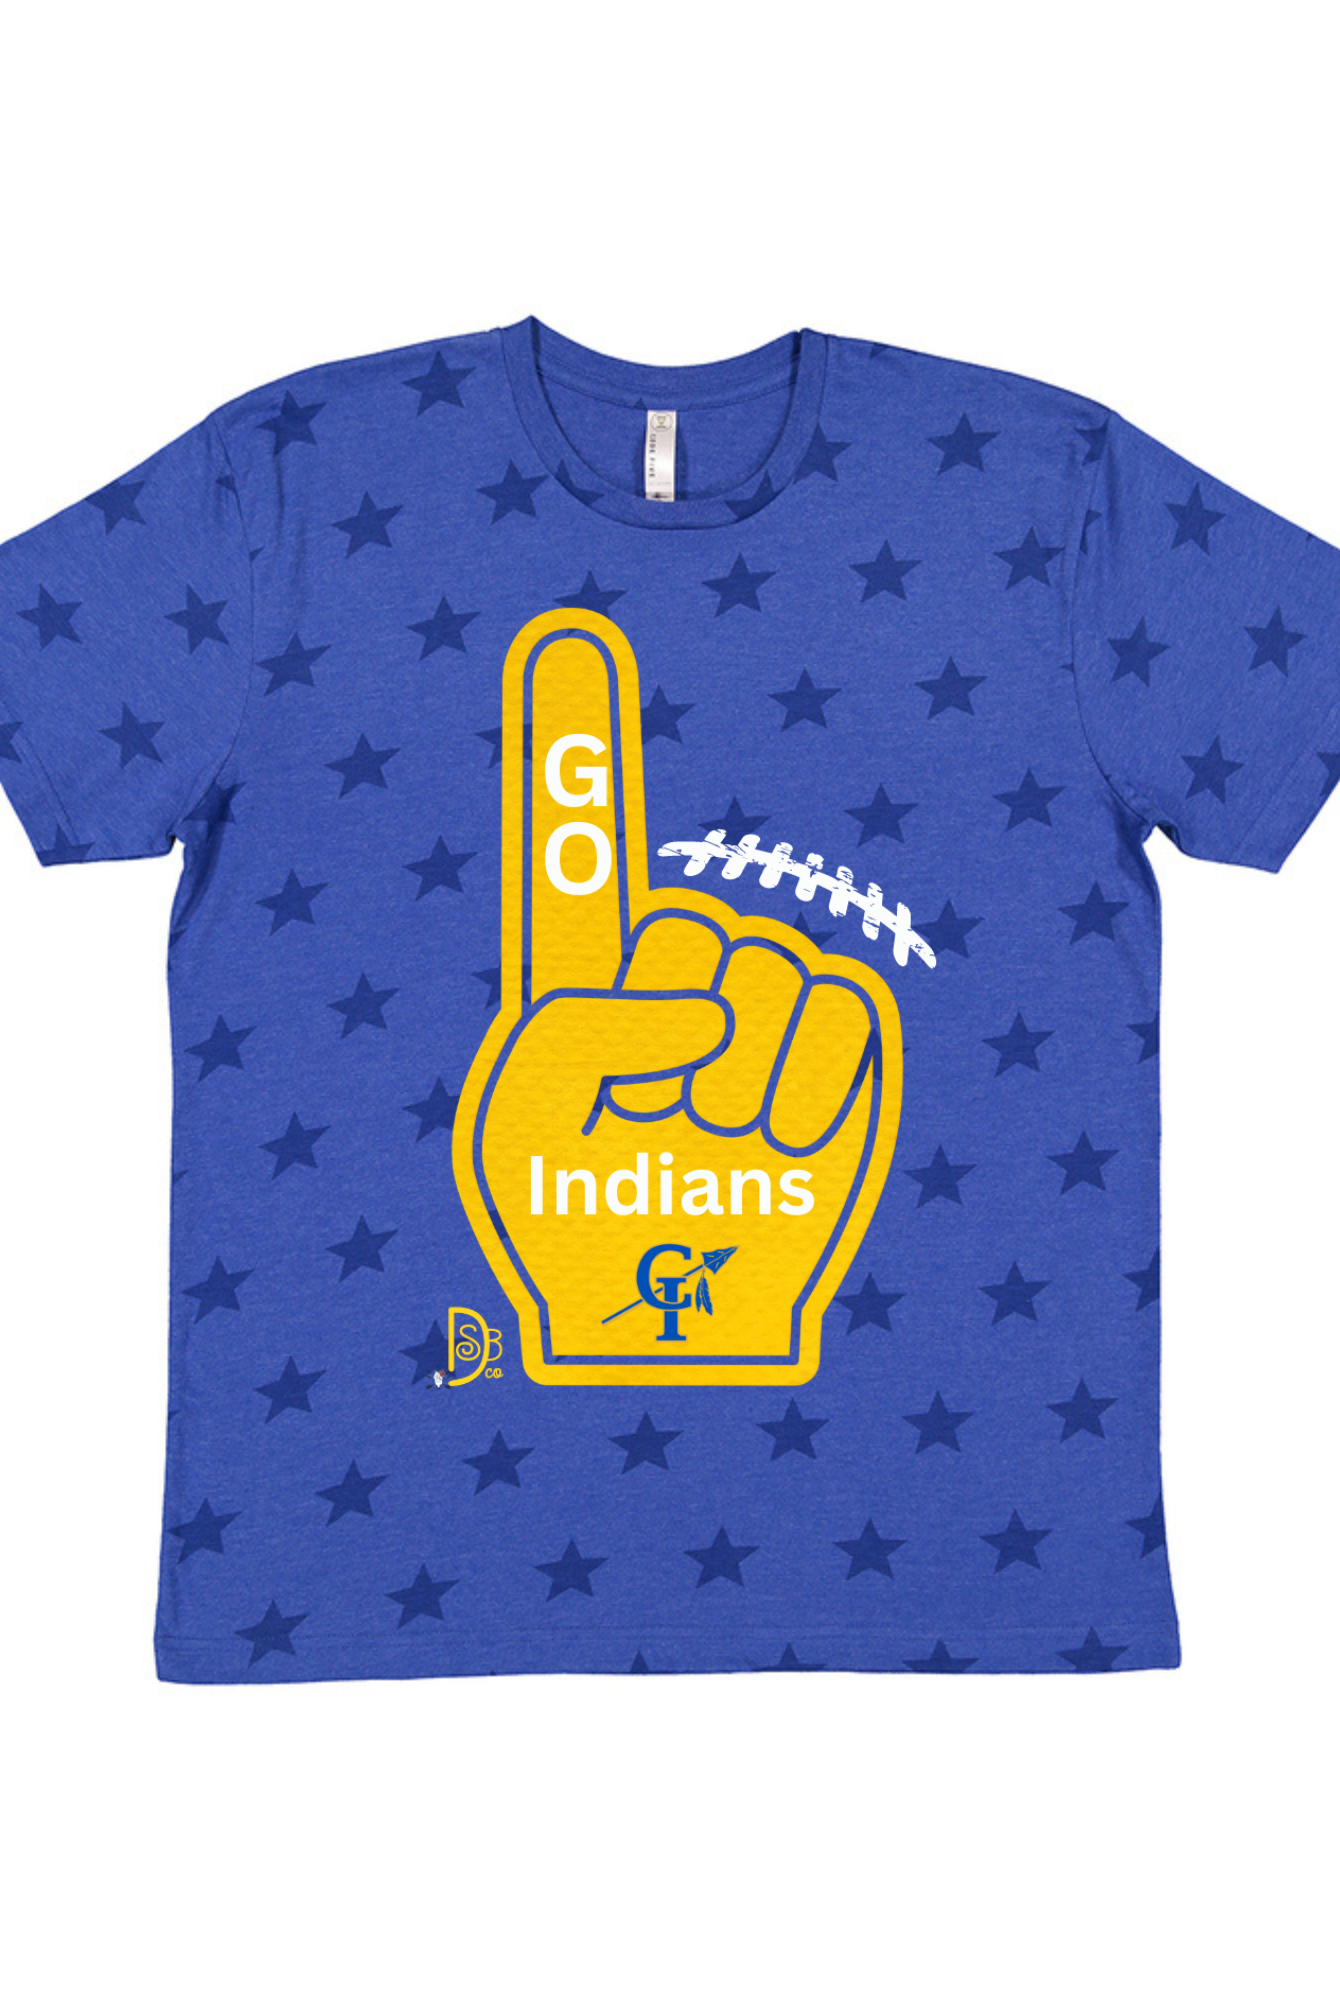 Team #1 Foam Finger Graphic Tee-Graphic Tees-Deadwood South Boutique & Company-Deadwood South Boutique, Women's Fashion Boutique in Henderson, TX